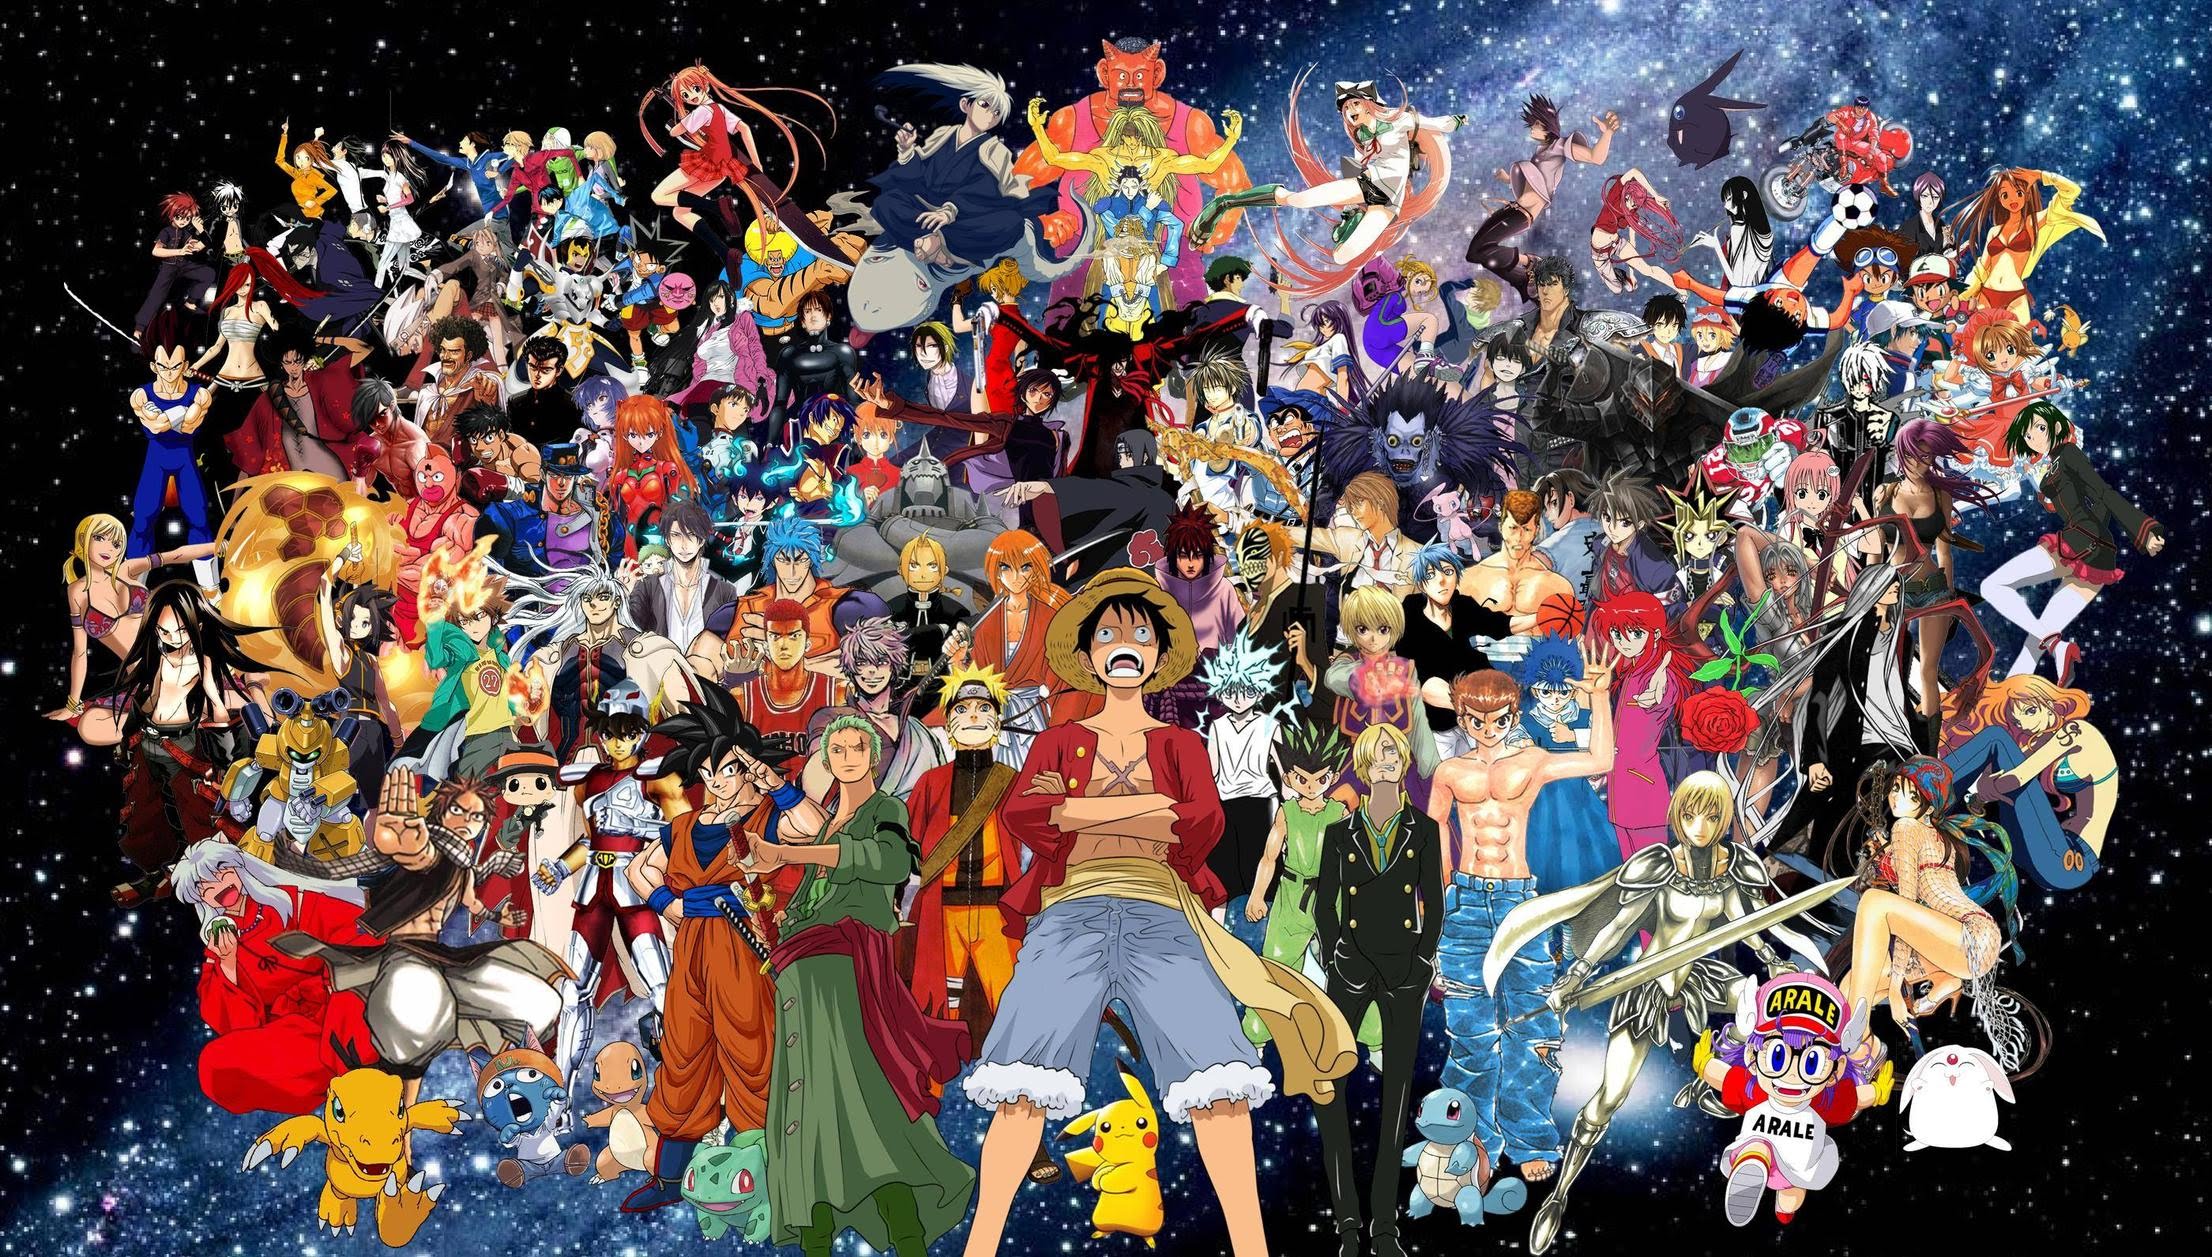 A large group of anime characters standing together